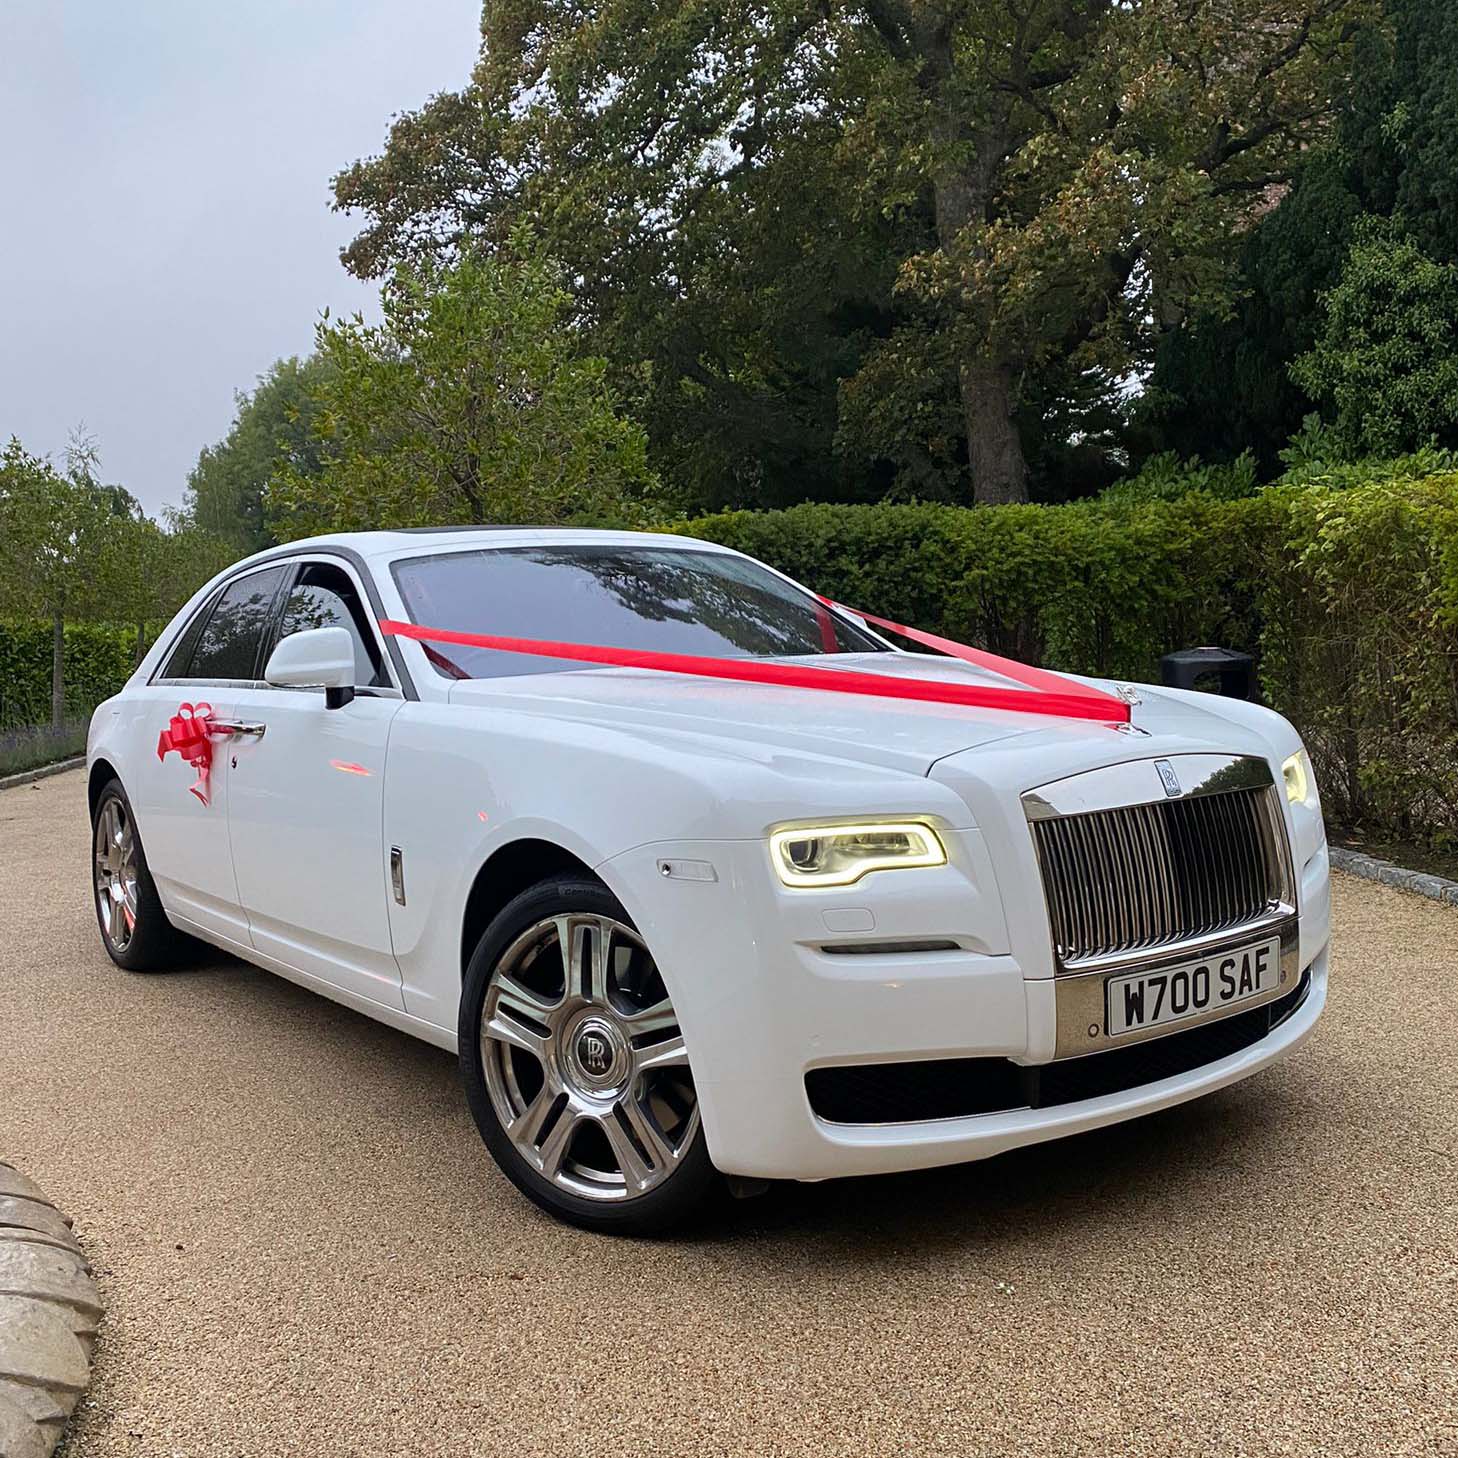 White Rolls-Royce Ghost decorated with red ribbons and bows on door handles